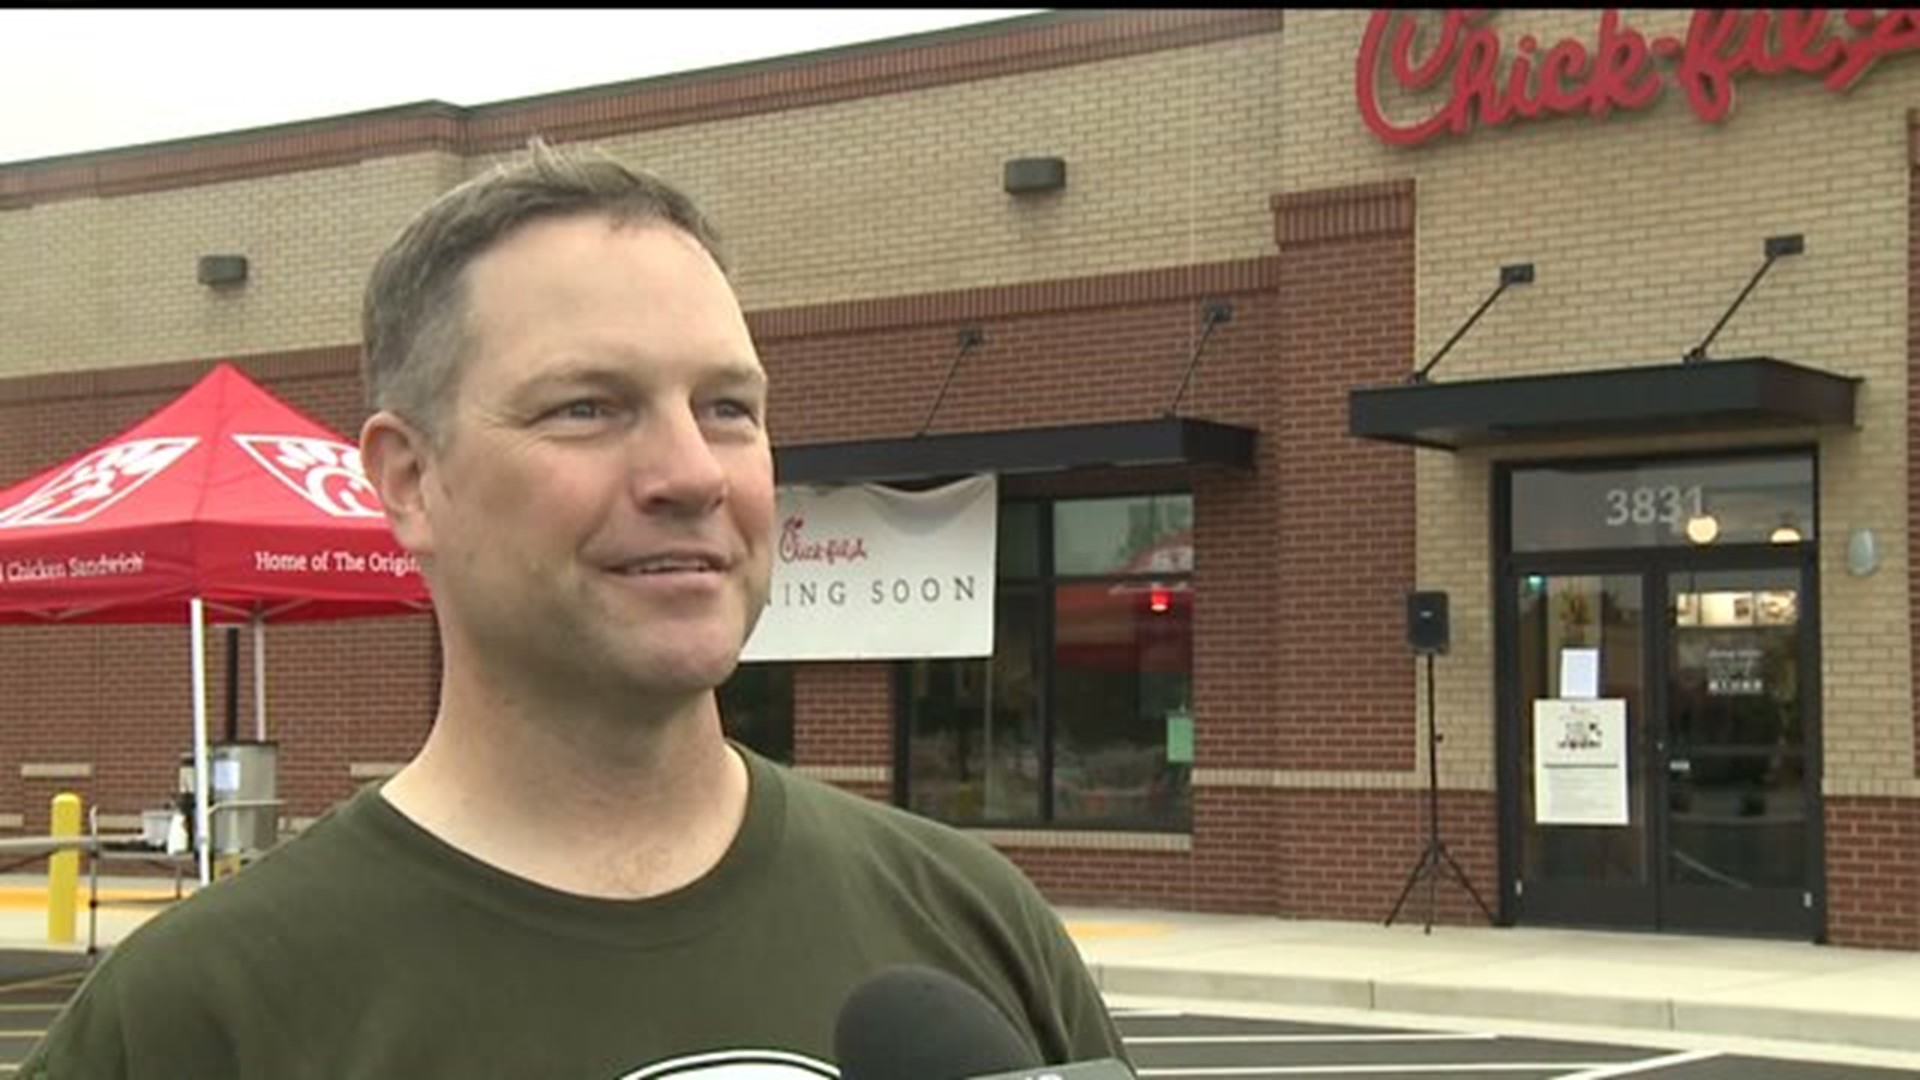 People camping out at new Chick-fil-A in Moline